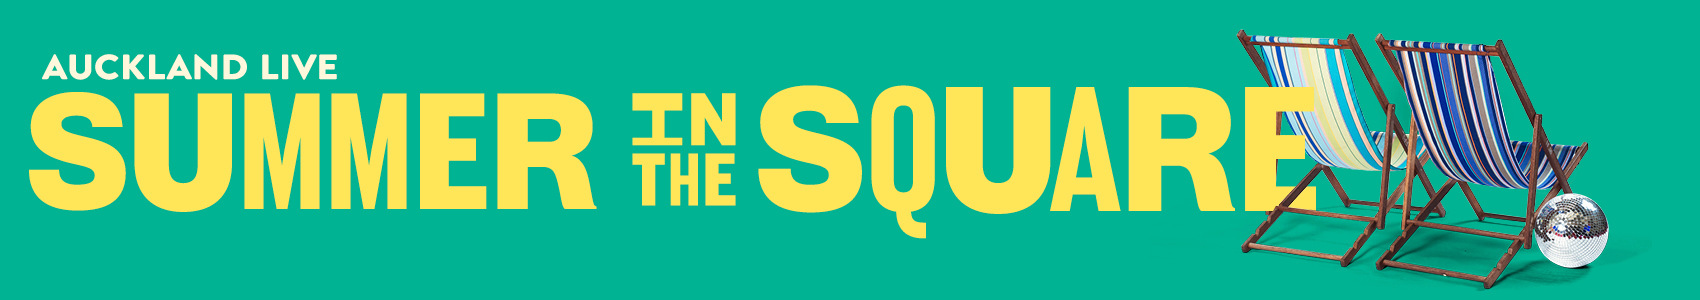 Auckland Live Summer in the Square 2019